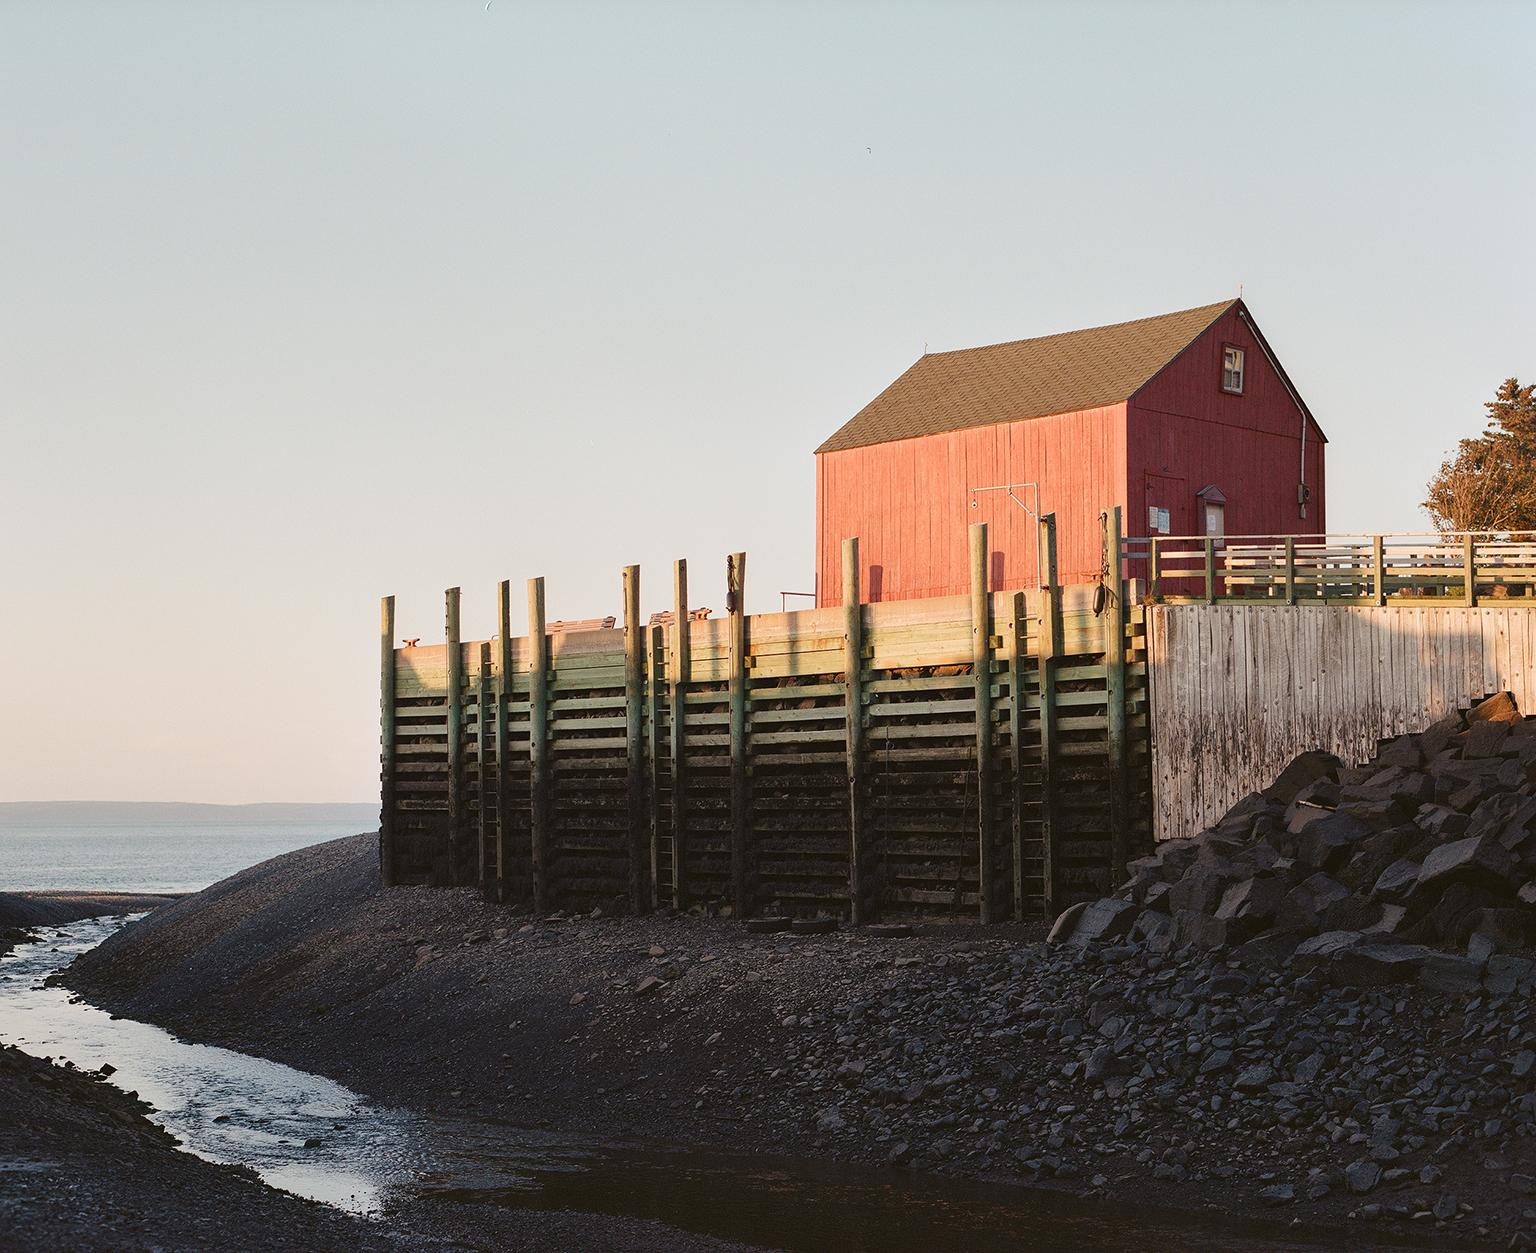 Lowtide 2, Nova Scotia, Canada., 2021, Archival Dye Piment Print. 24” x 30”, Edition of 15.
_________________________________________________________________________________
Signed, Dated and Numbered on the Reverse.

Jim Ryce has focused on the